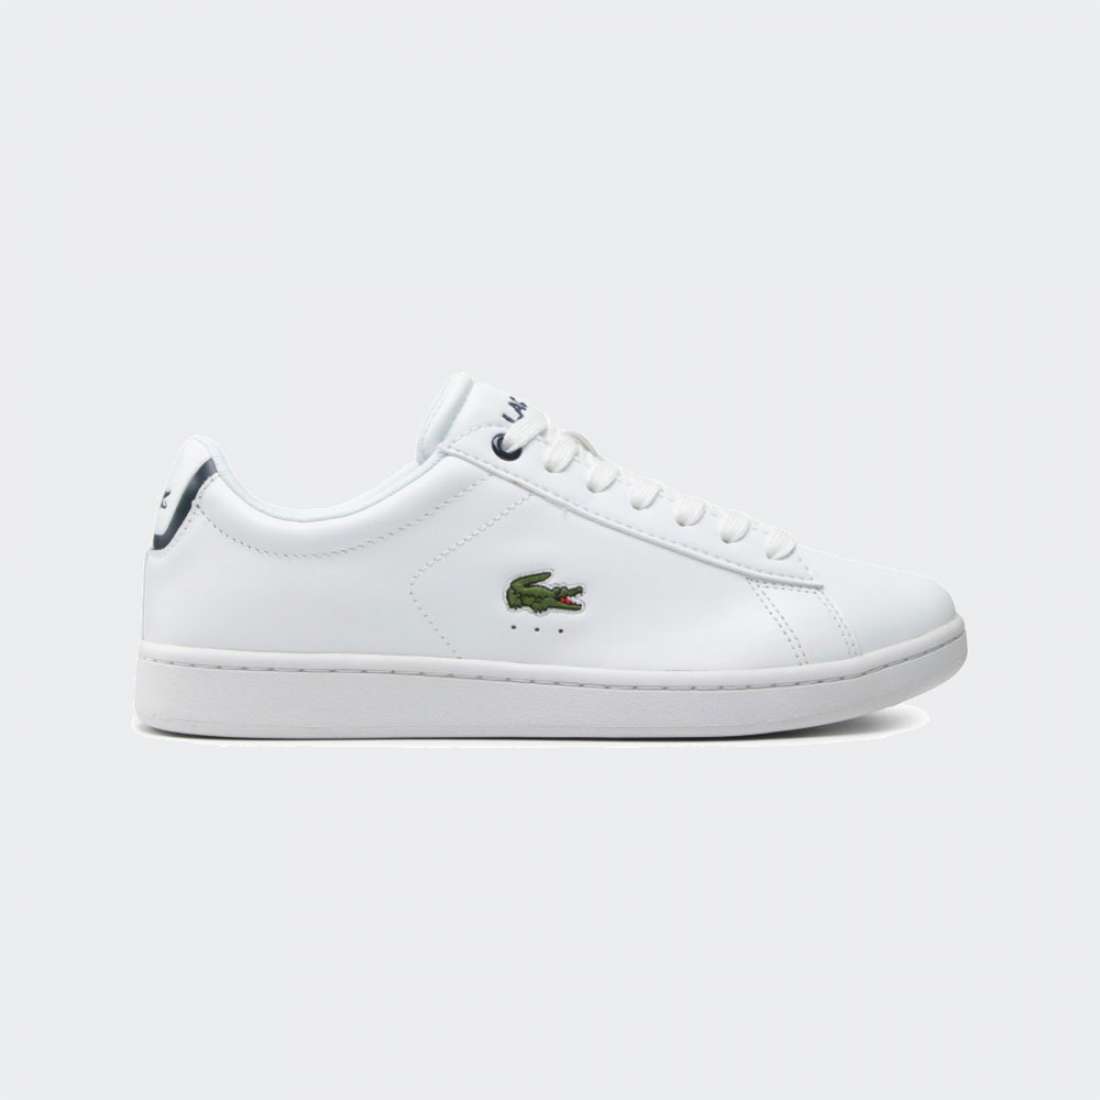 LACOSTE CARNABY BL2 WHITE/NAVY